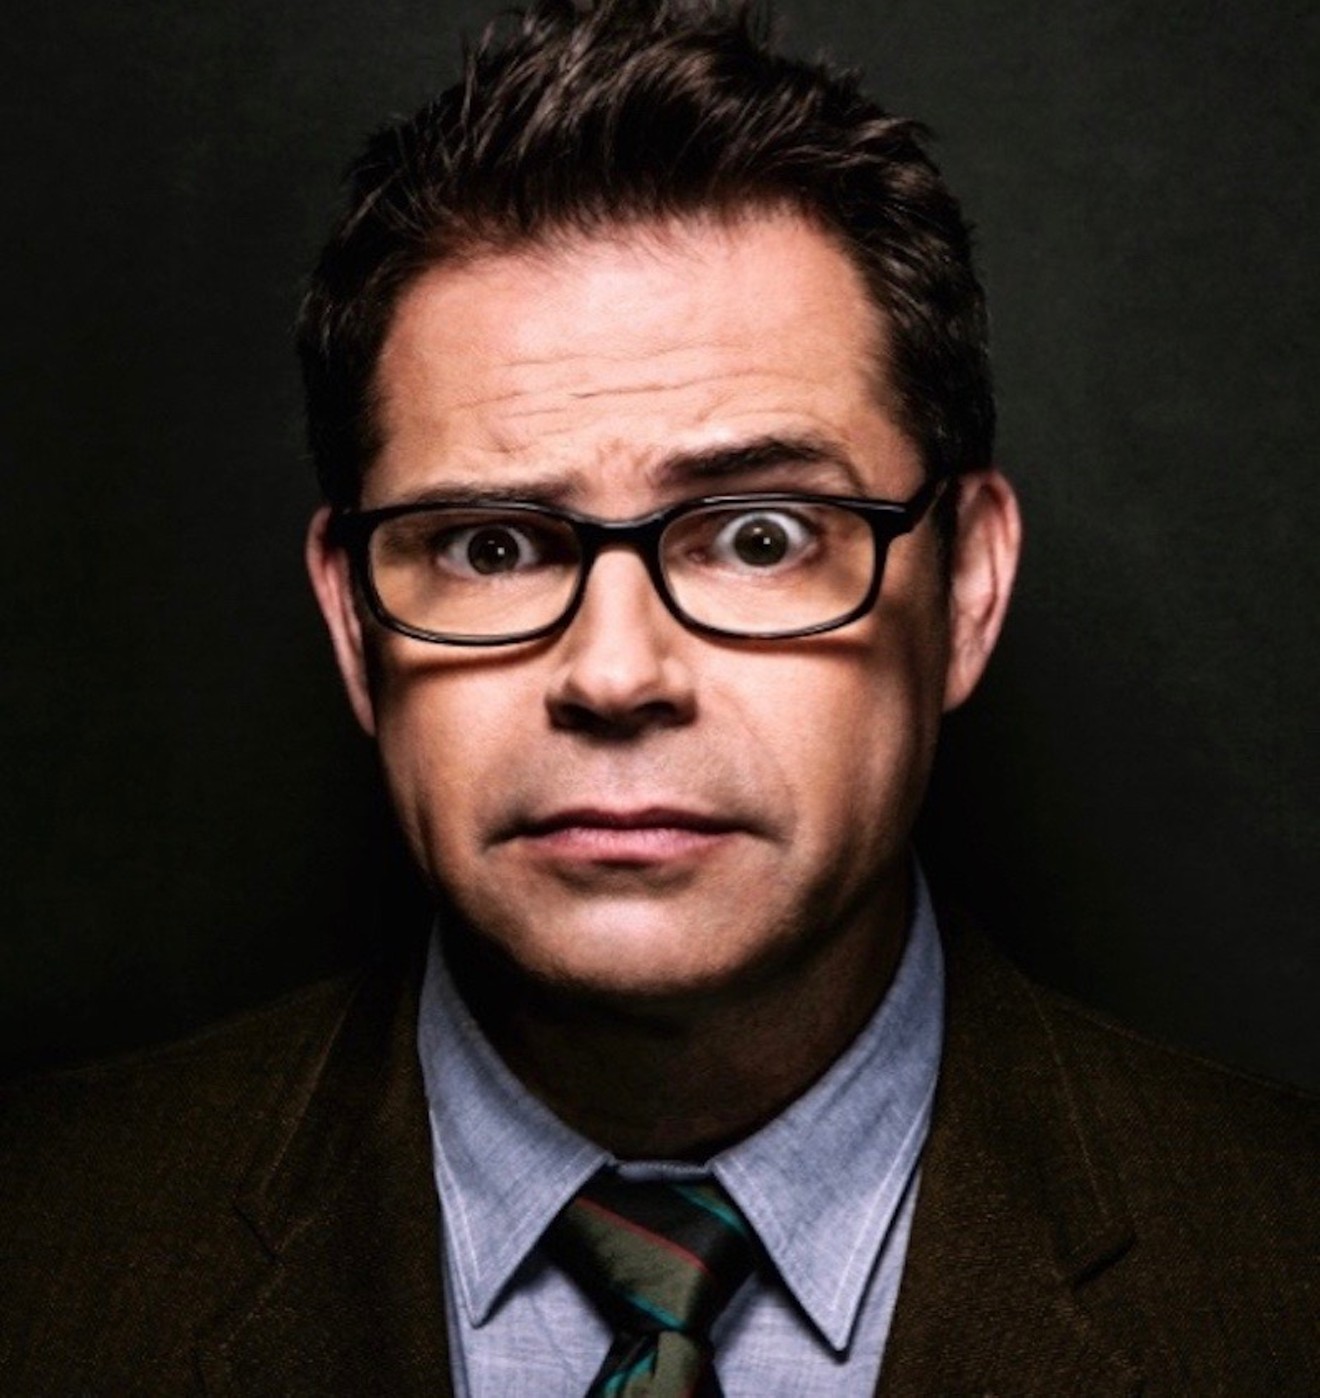 Dana Gould headlines the Dairy Arts Center on January 11 and the downtown Comedy Works January 12-14.